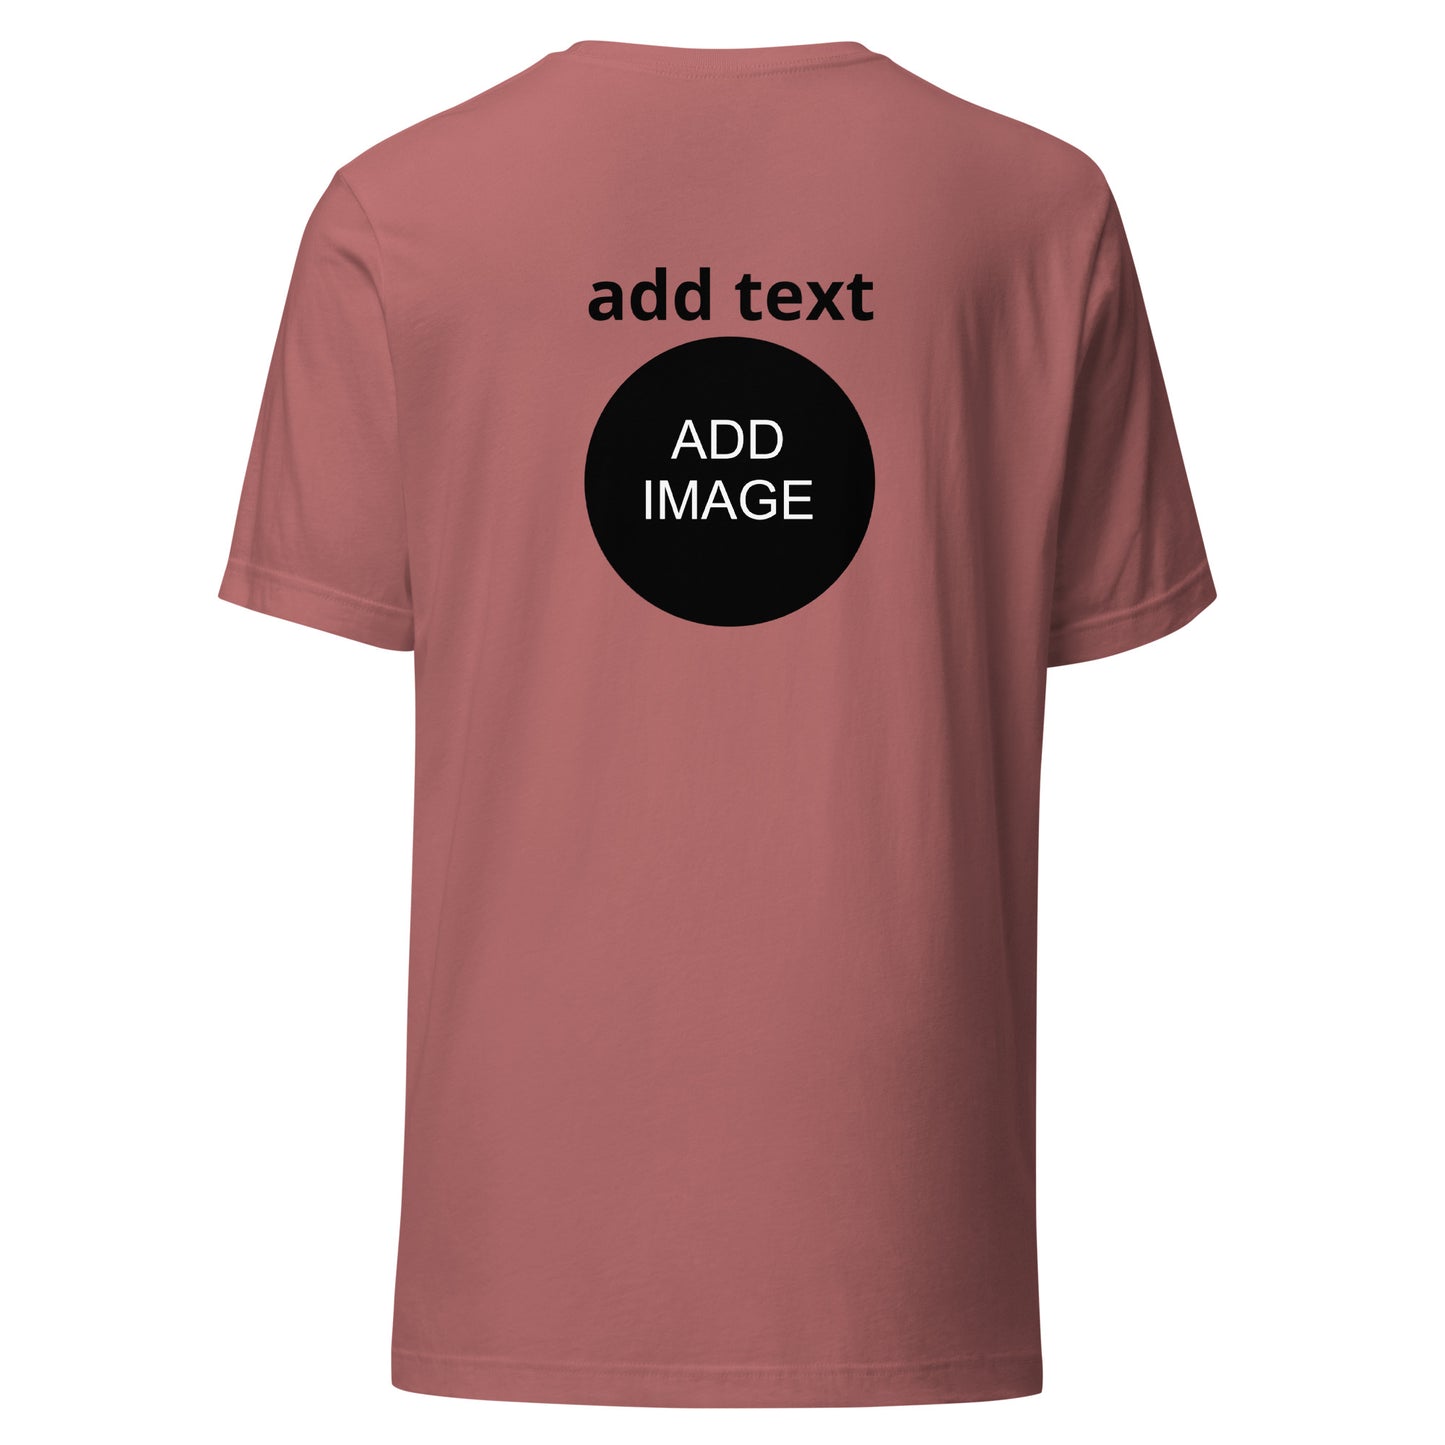 Small - Medium Unisex [front & back image with top black text]